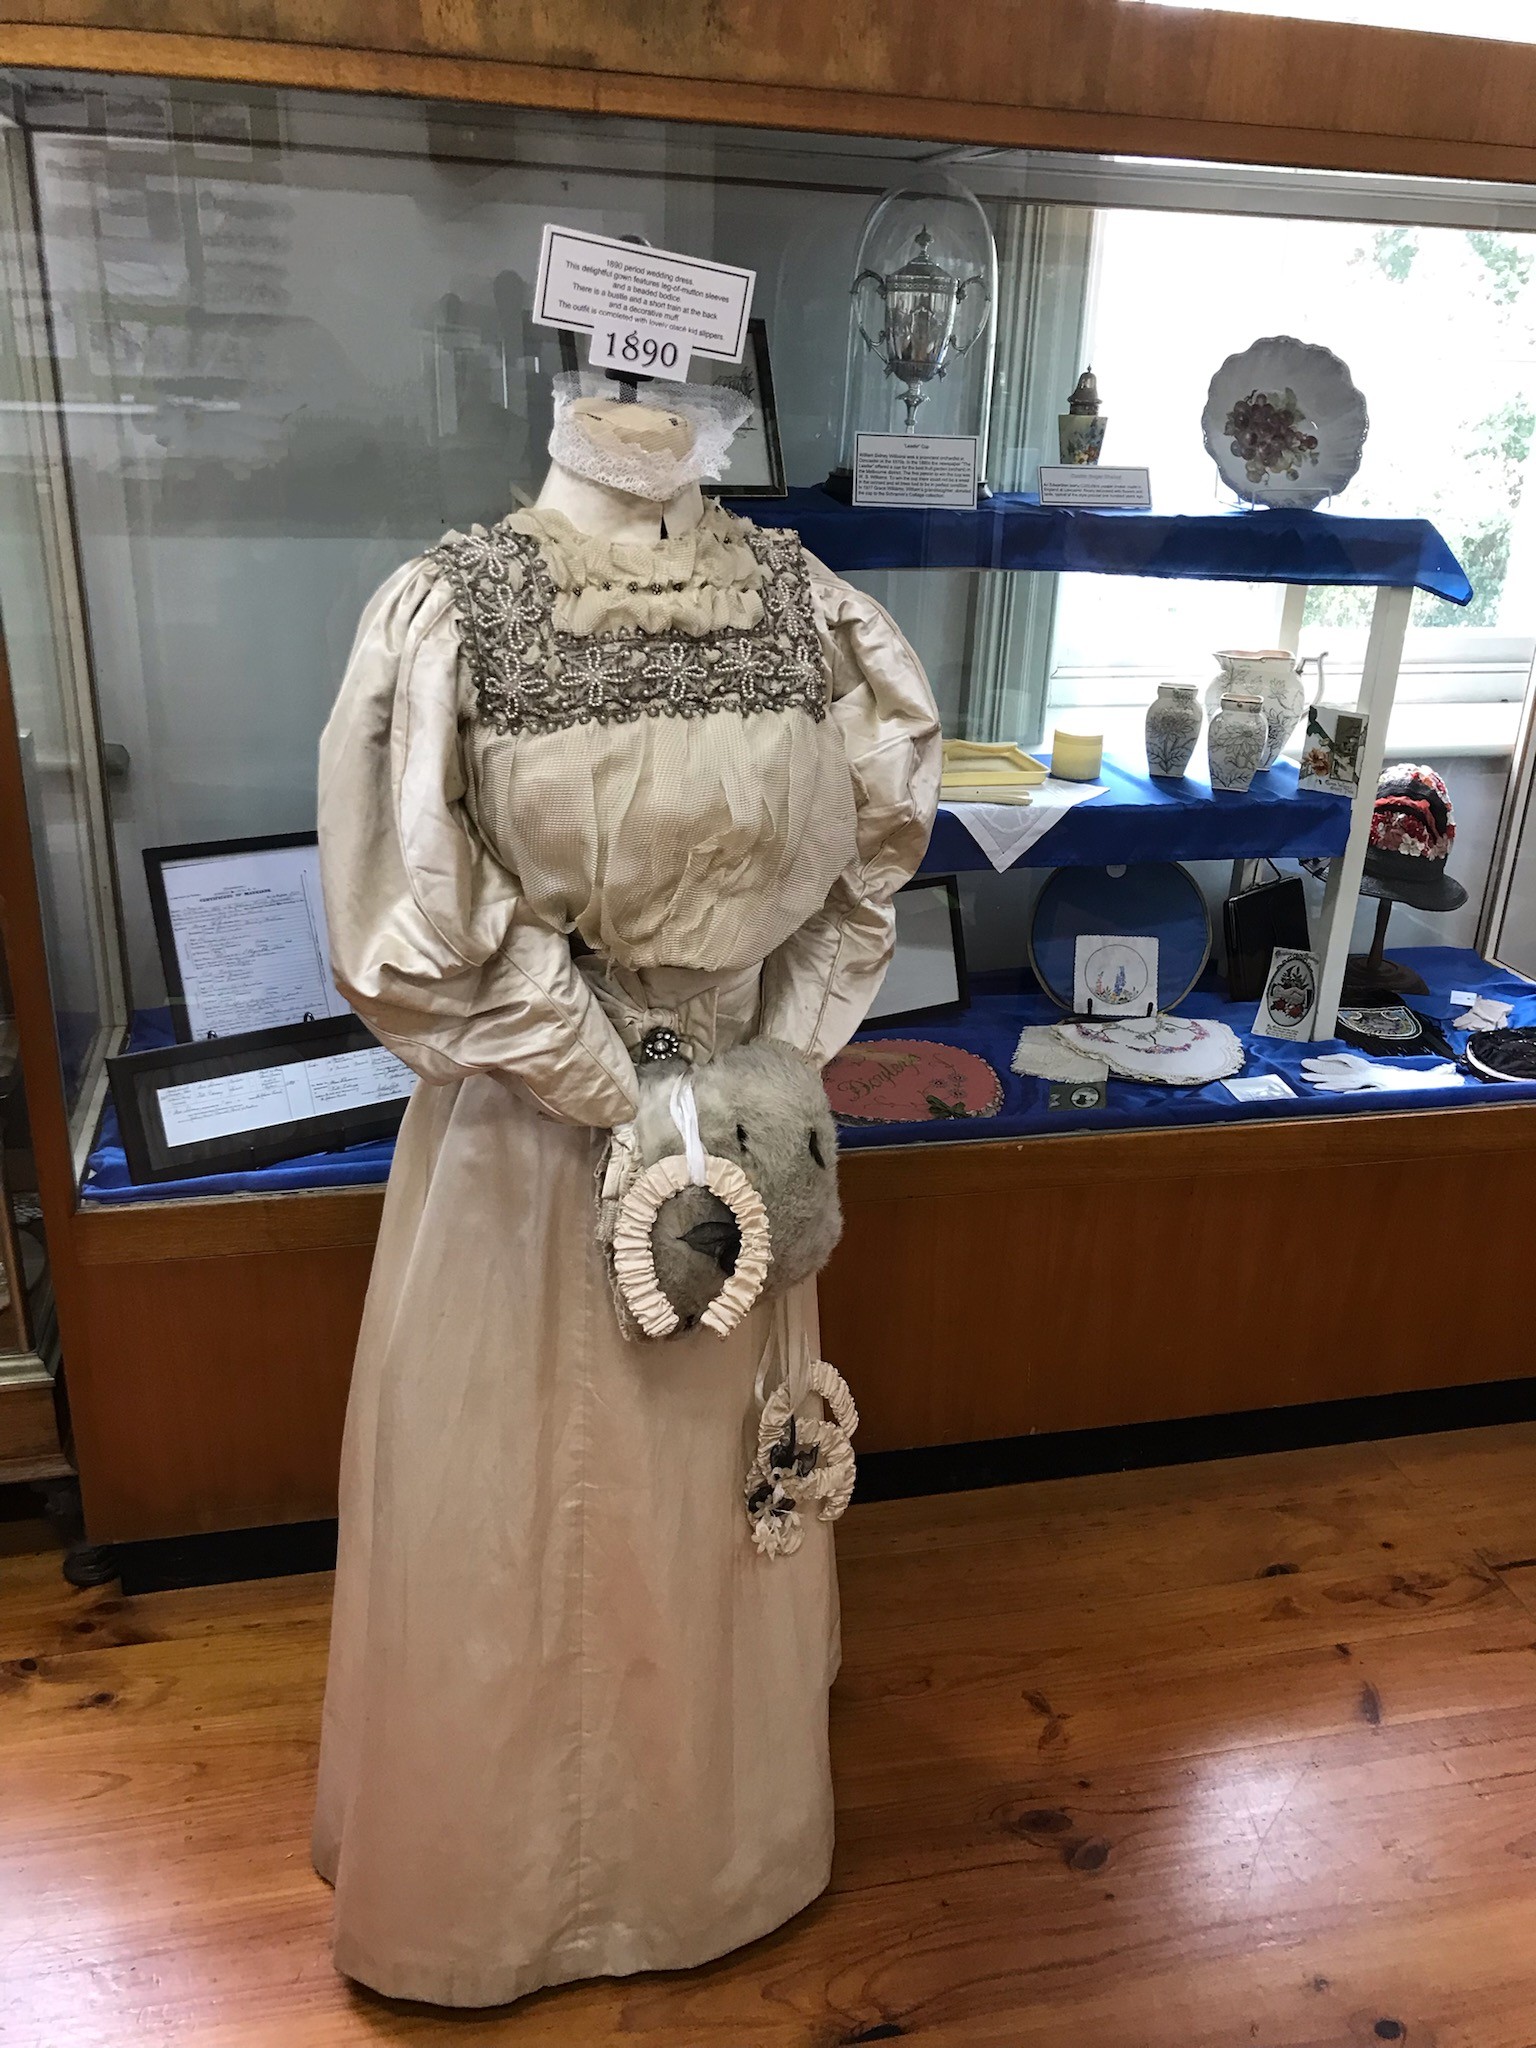 Exhibition of Costumes